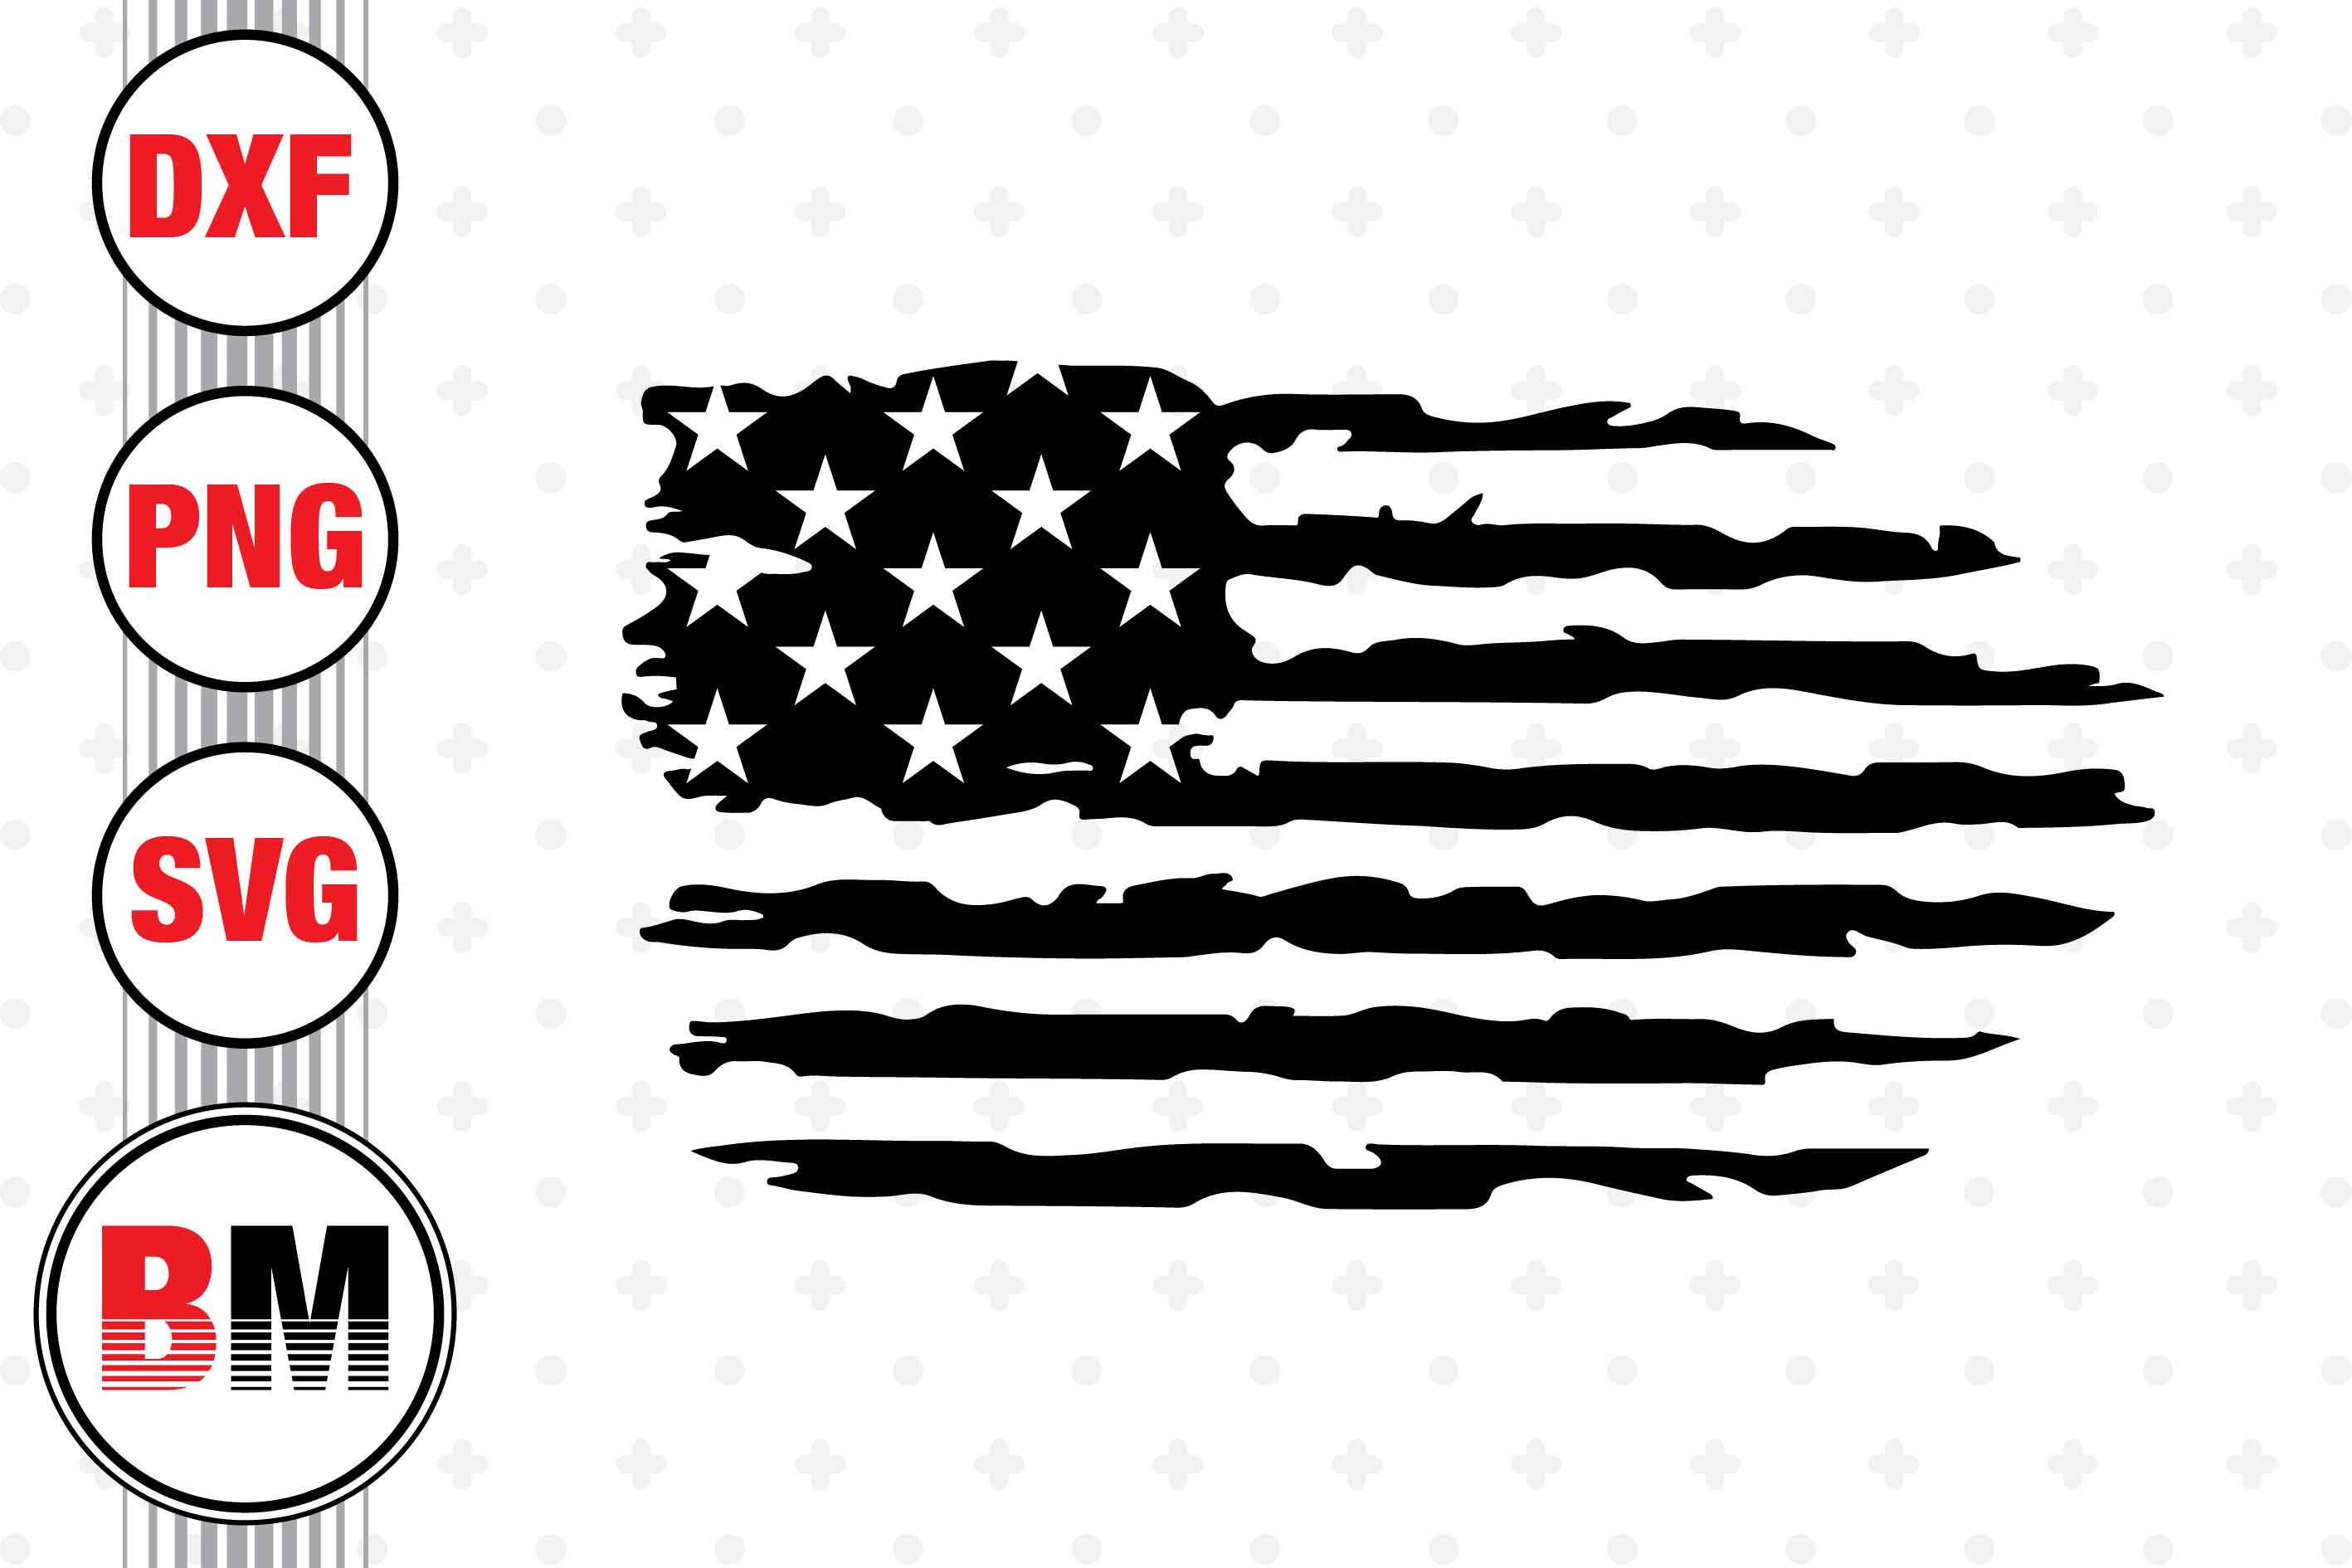 Distressed American Flag SVG, PNG, DXF Files By Bmdesign